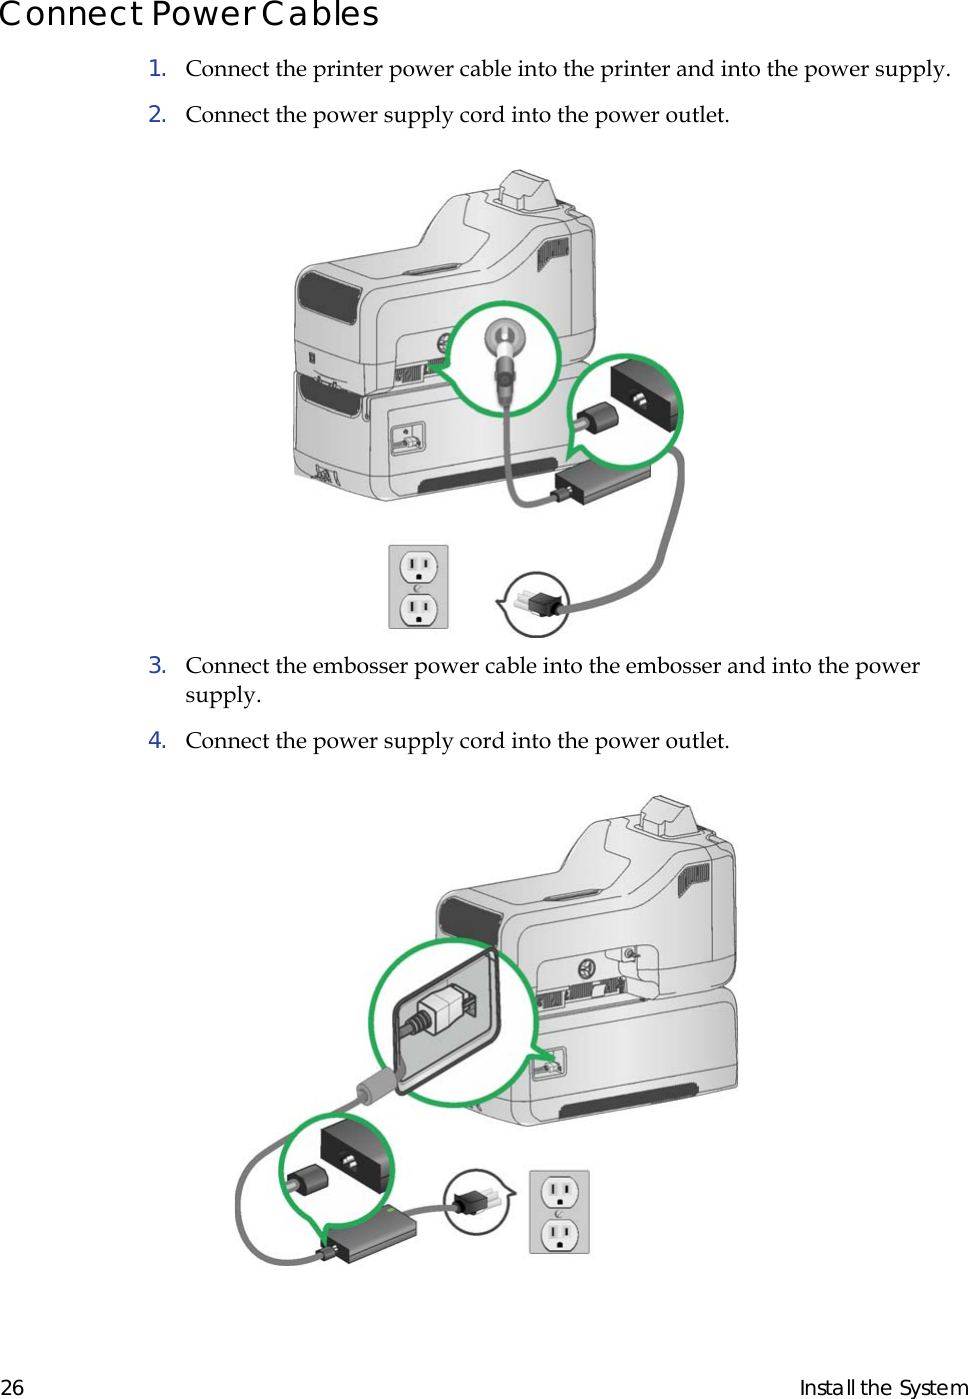  26 Install the SystemConnect Power Cables1.  Connect the printer power cable into the printer and into the power supply. 2.  Connect the power supply cord into the power outlet.                                                              3.  Connect the embosser power cable into the embosser and into the power supply.4.  Connect the power supply cord into the power outlet.                                                              